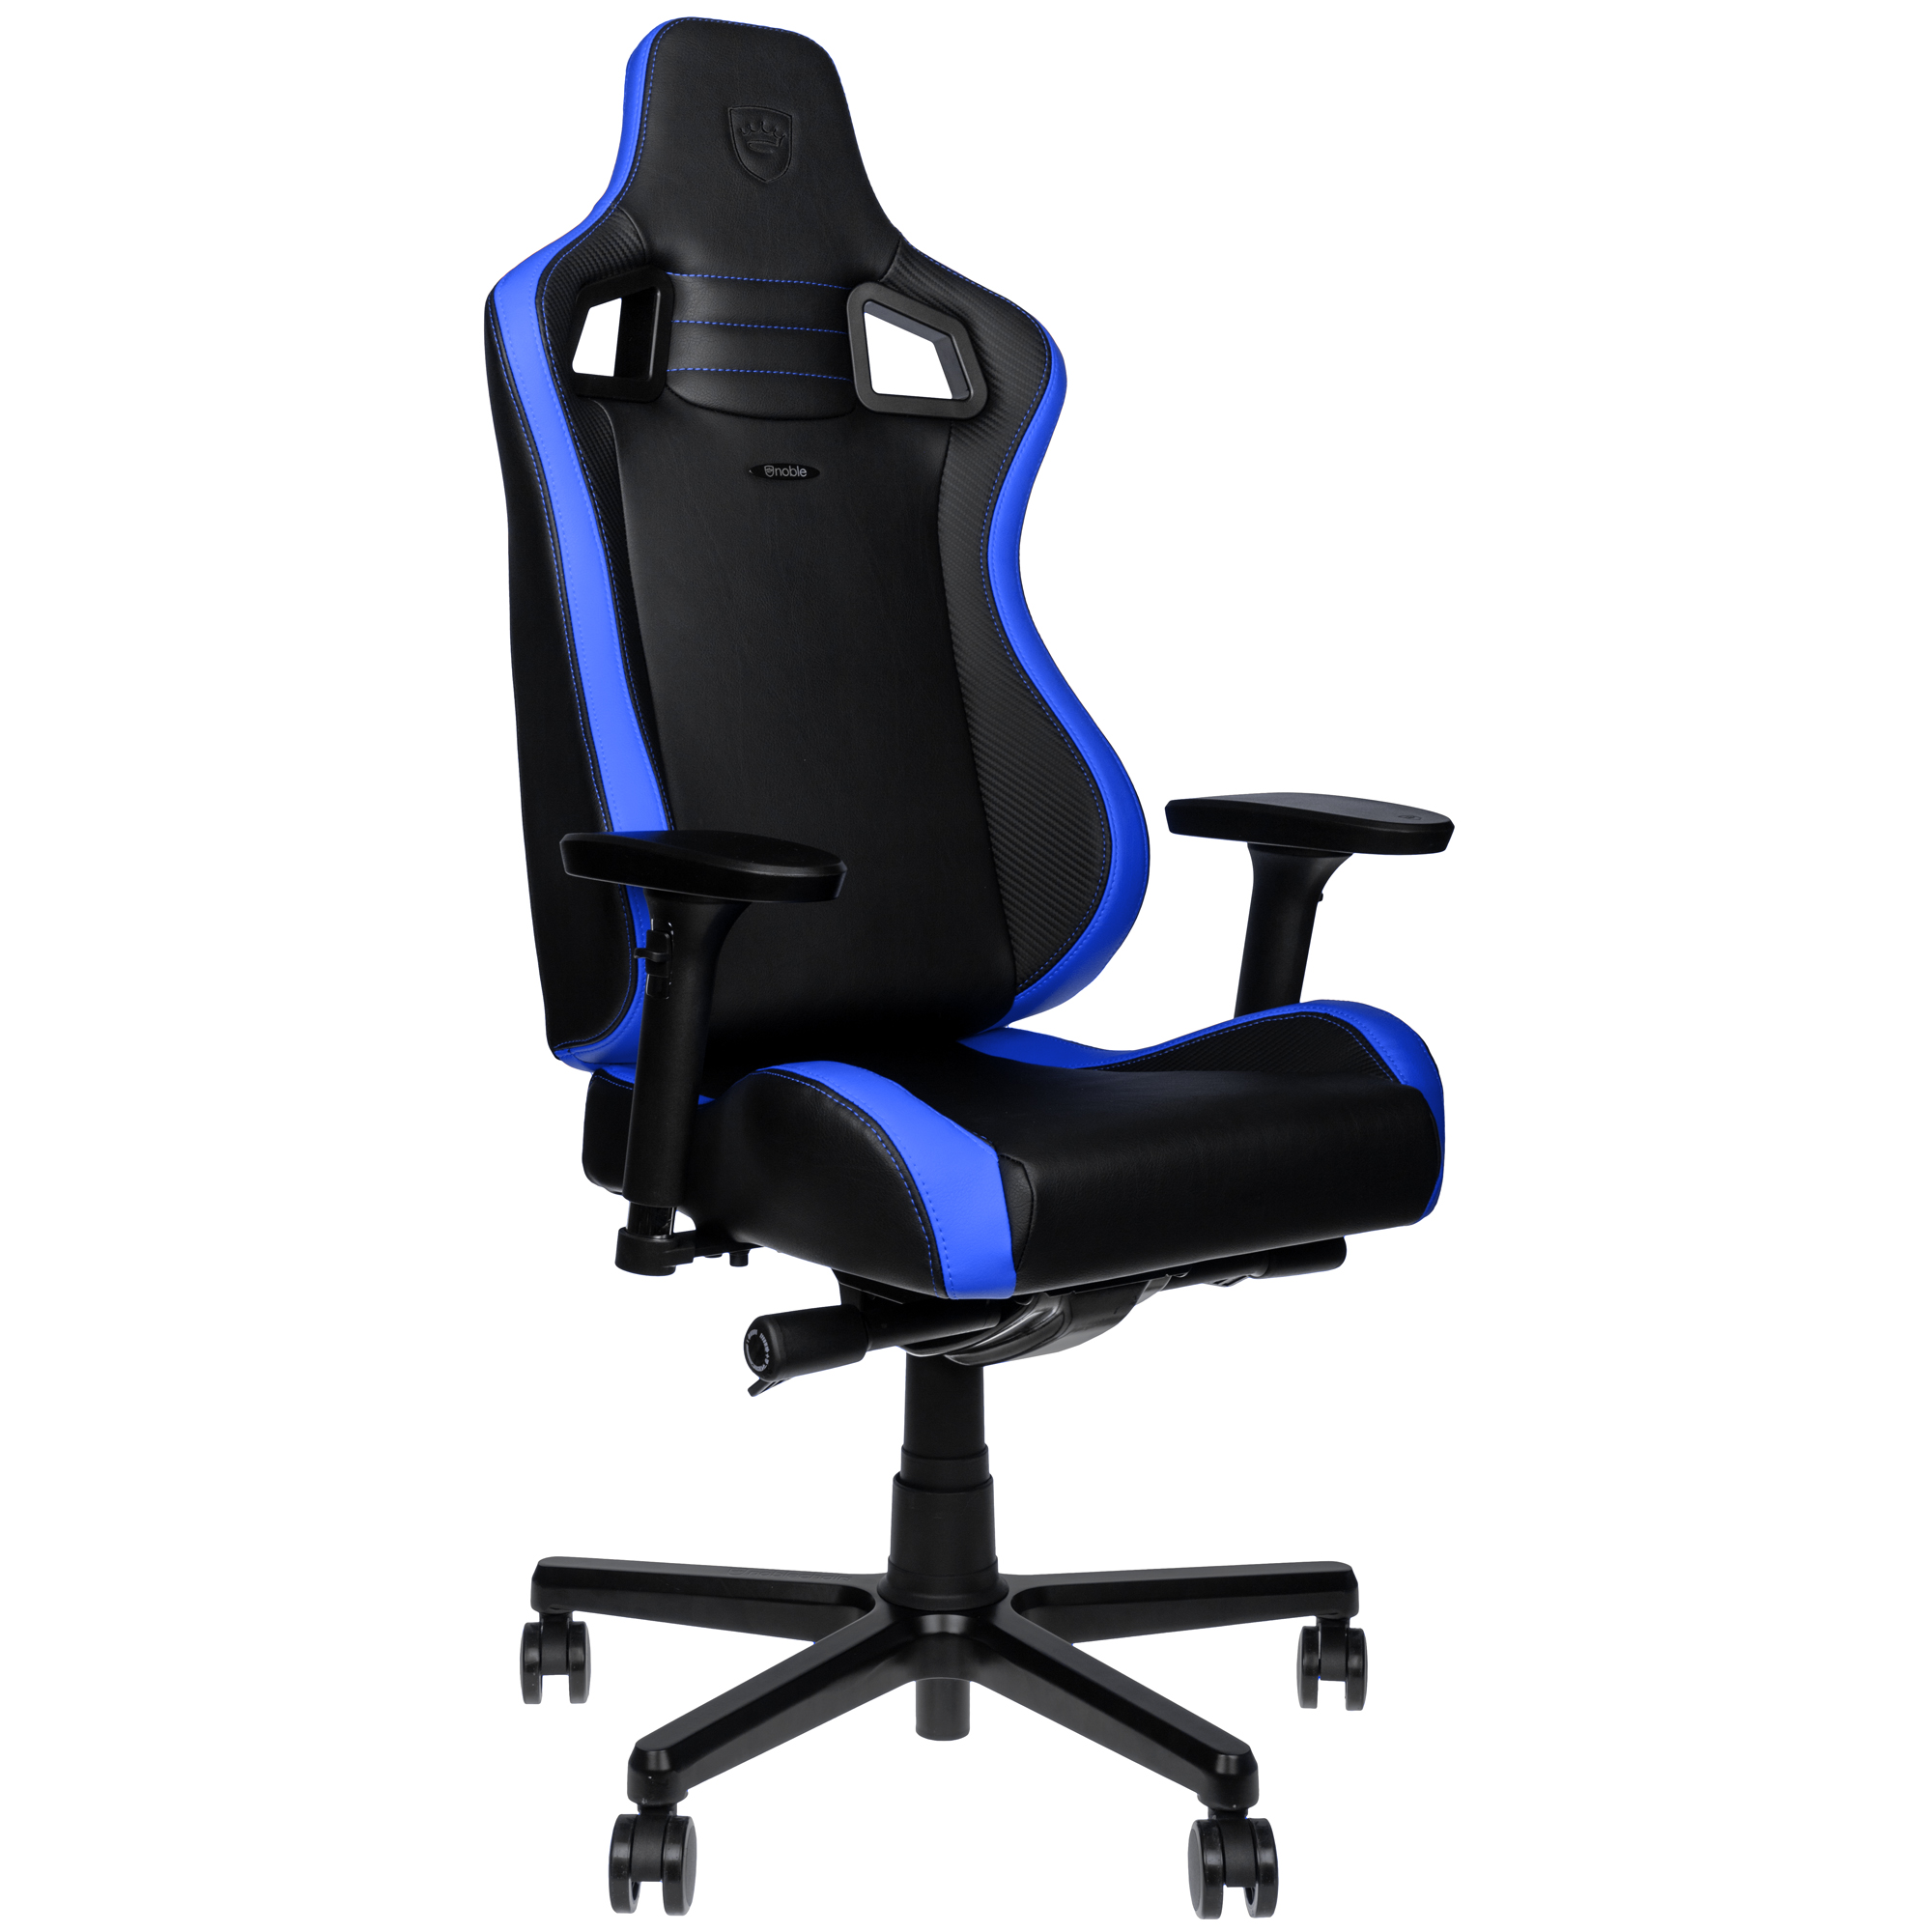 noblechairs EPIC Compact Gaming chair - black/carbon/blue